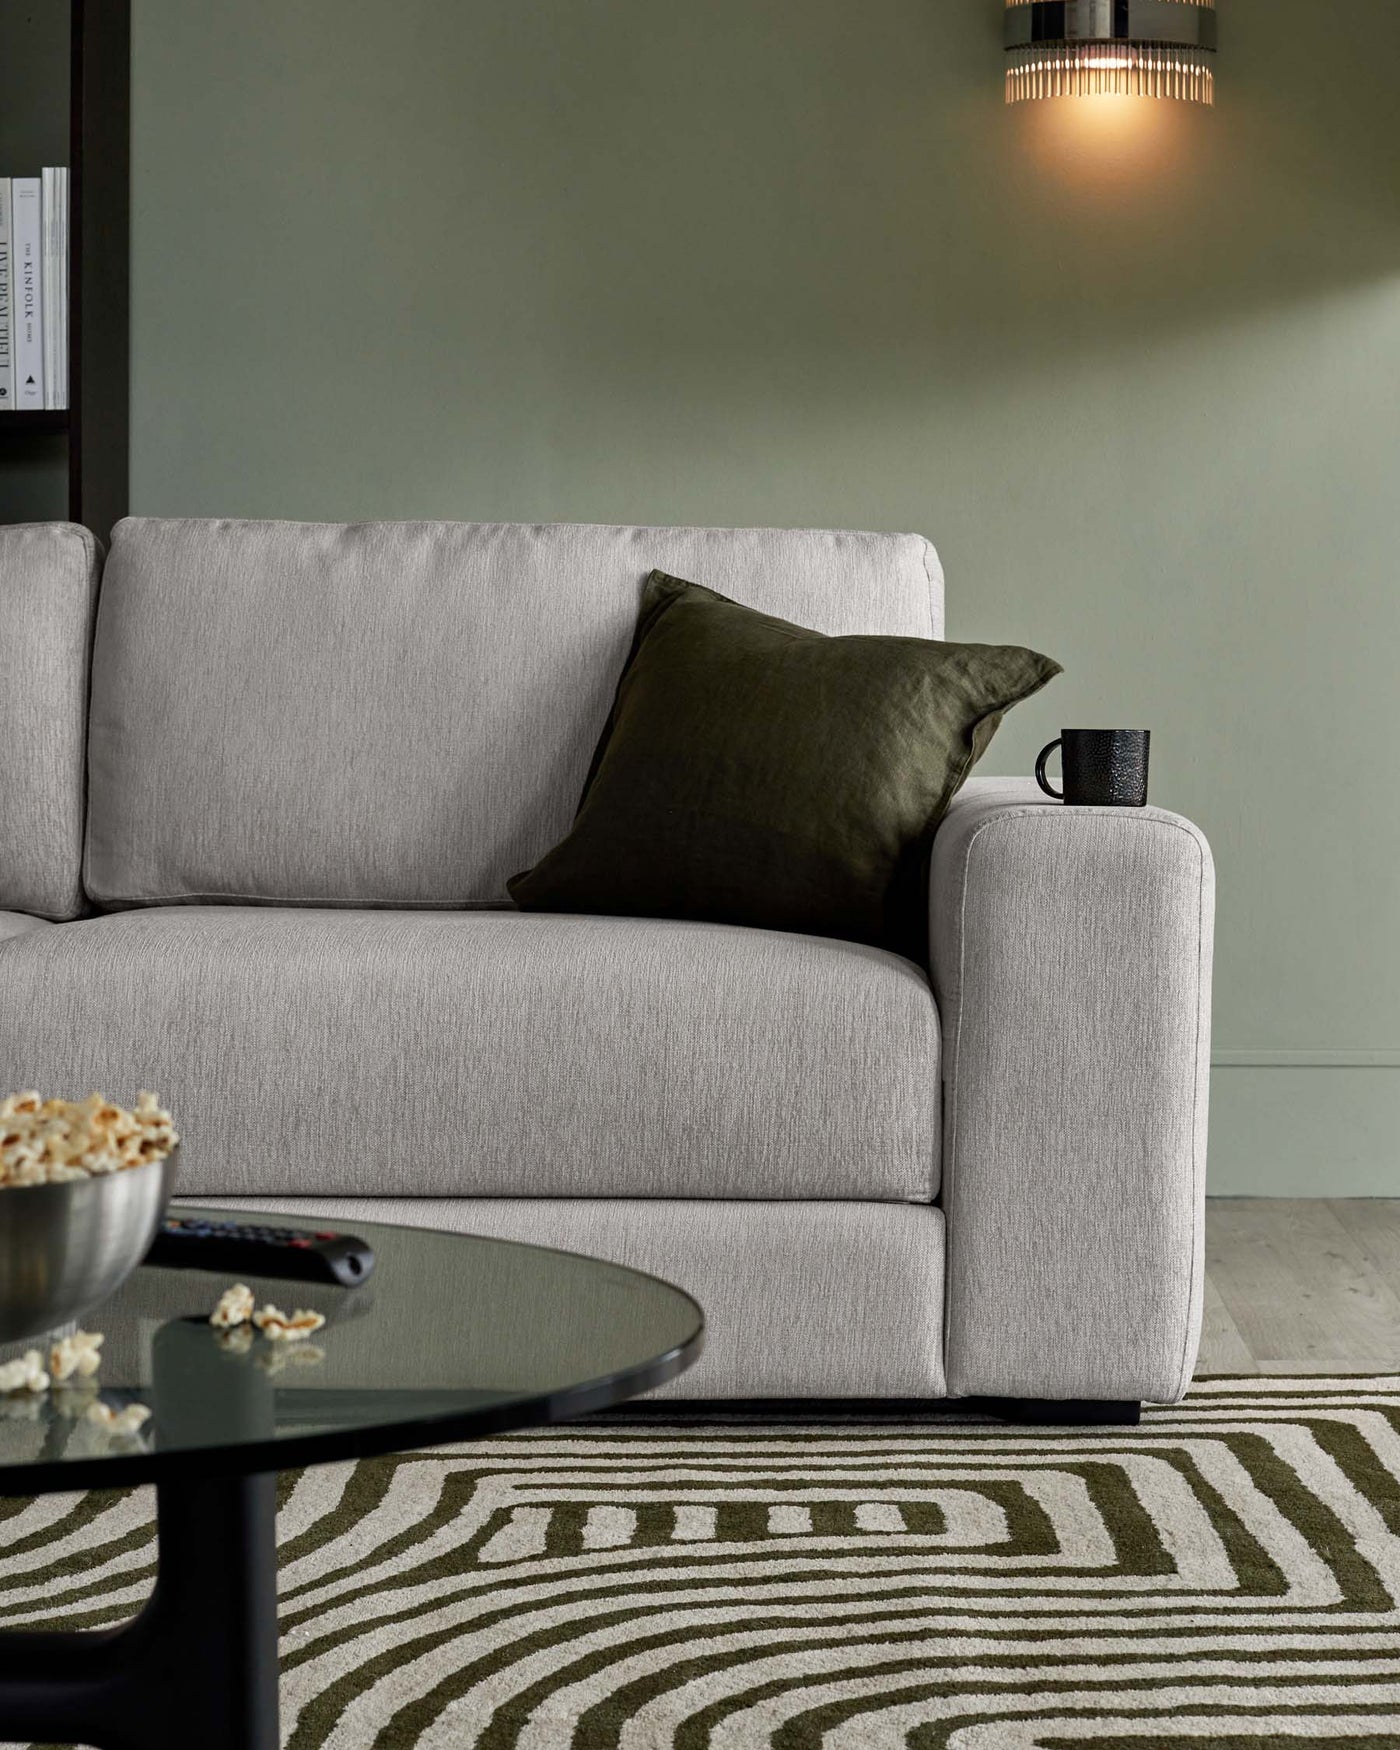 Modern light grey fabric sofa with a plush texture and clean lines, featuring one armrest visible in the image. The sofa is accessorized with a dark green accent pillow and accompanied by a round black coffee table with a matte finish and smoked glass top. The set is placed on a patterned area rug with geometric designs in shades of green and beige. A brass-coloured wall-mounted light fixture provides warm ambient lighting above.